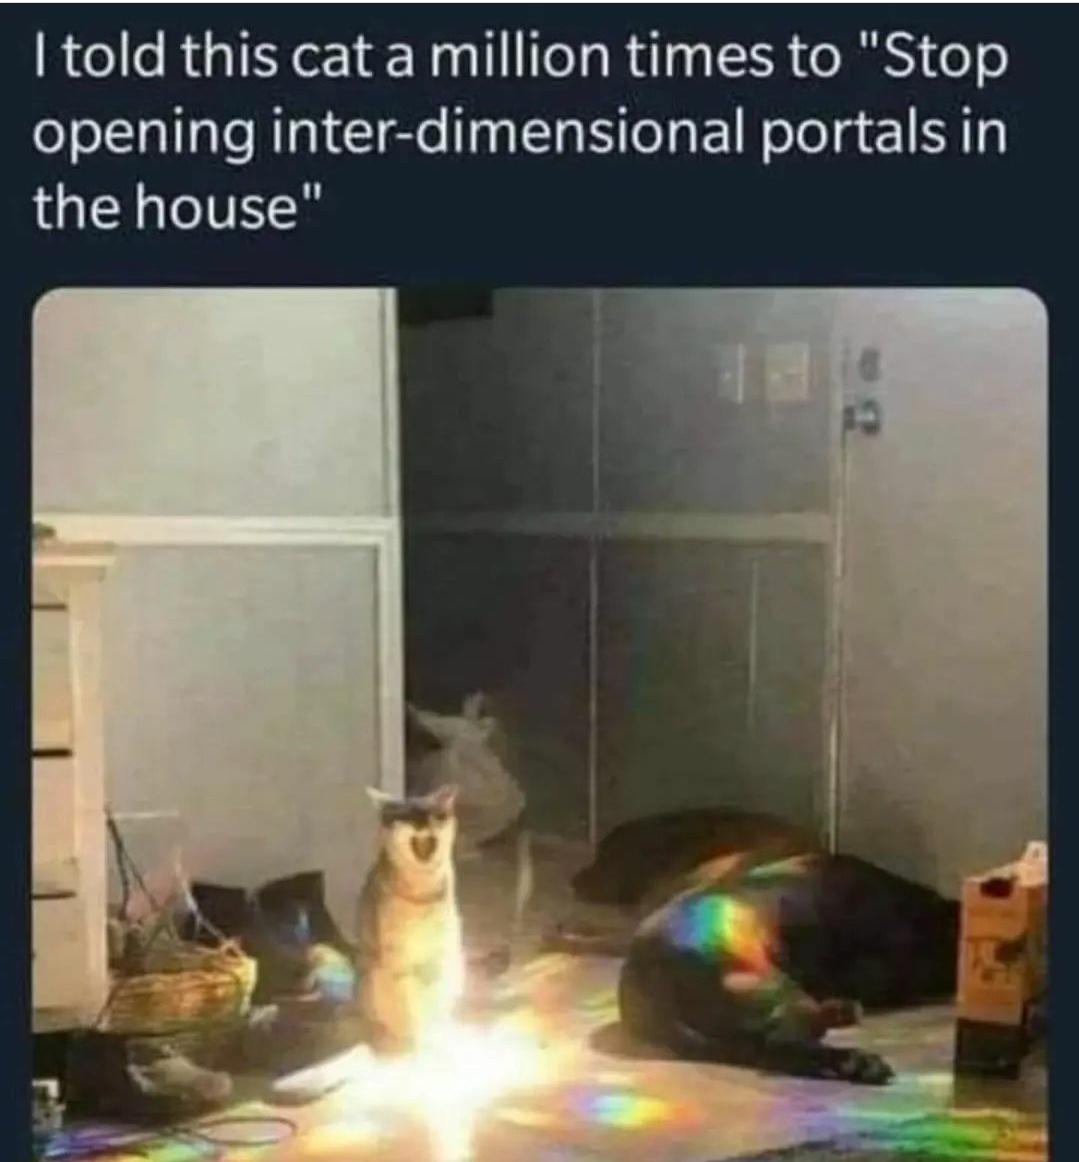 funny memes - dank memes - cat opening a portal - I told this cat a million times to "Stop opening interdimensional portals in the house"